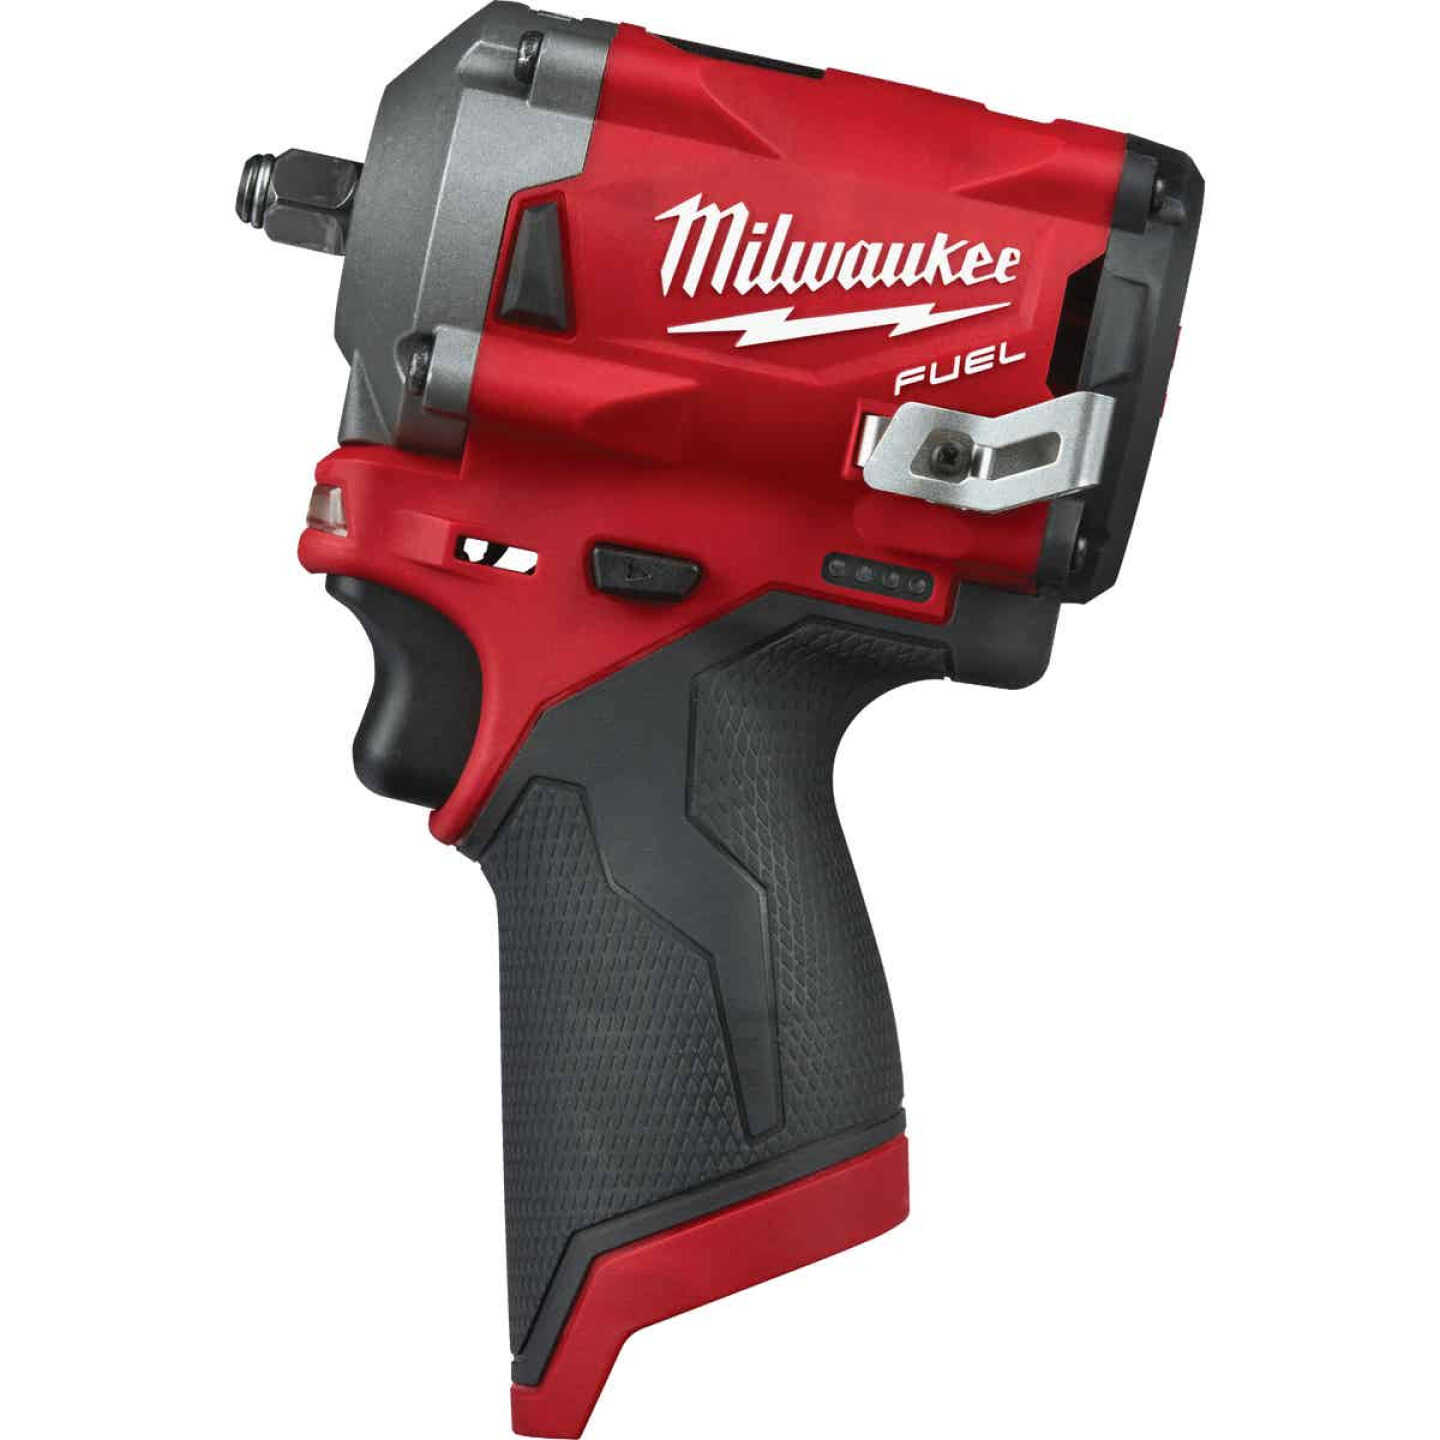 Milwaukee M12 3/8" Impact Wrench, 3Ah+6Ah Batteries, Charger & Case $199 at Home Depot (Available again but hurry!)